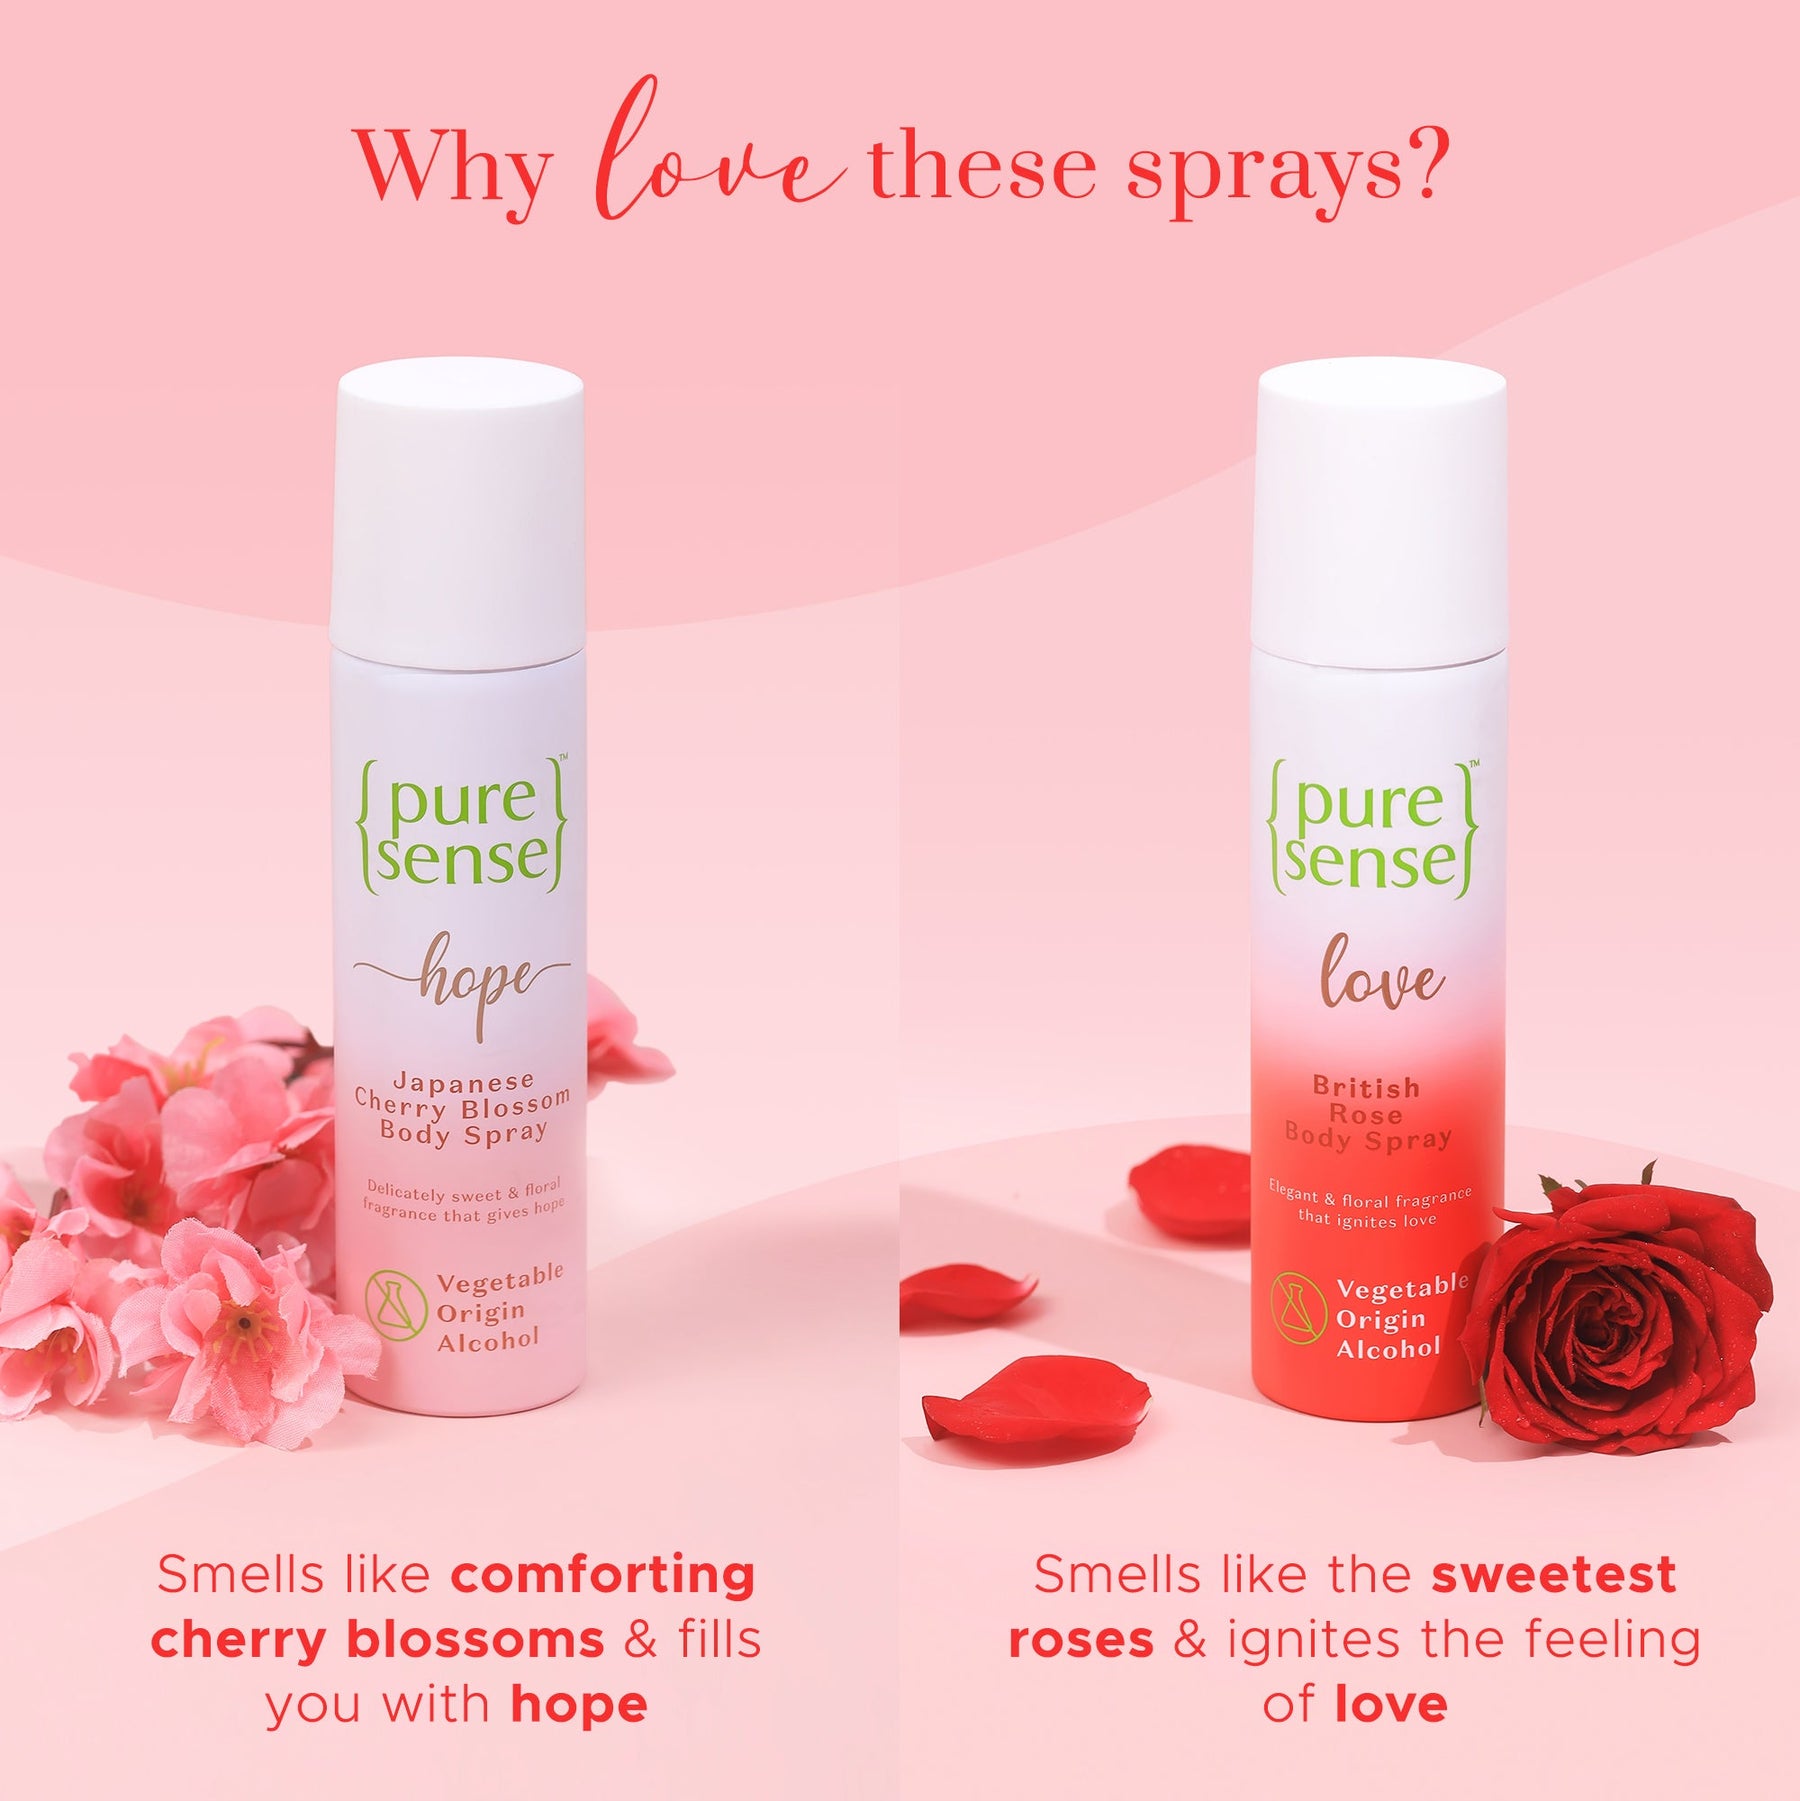 [CRED] British Rose Body Spray & Japanese Cherry Blossom Body Spray |  From the makers of Parachute Advansed | 300ml